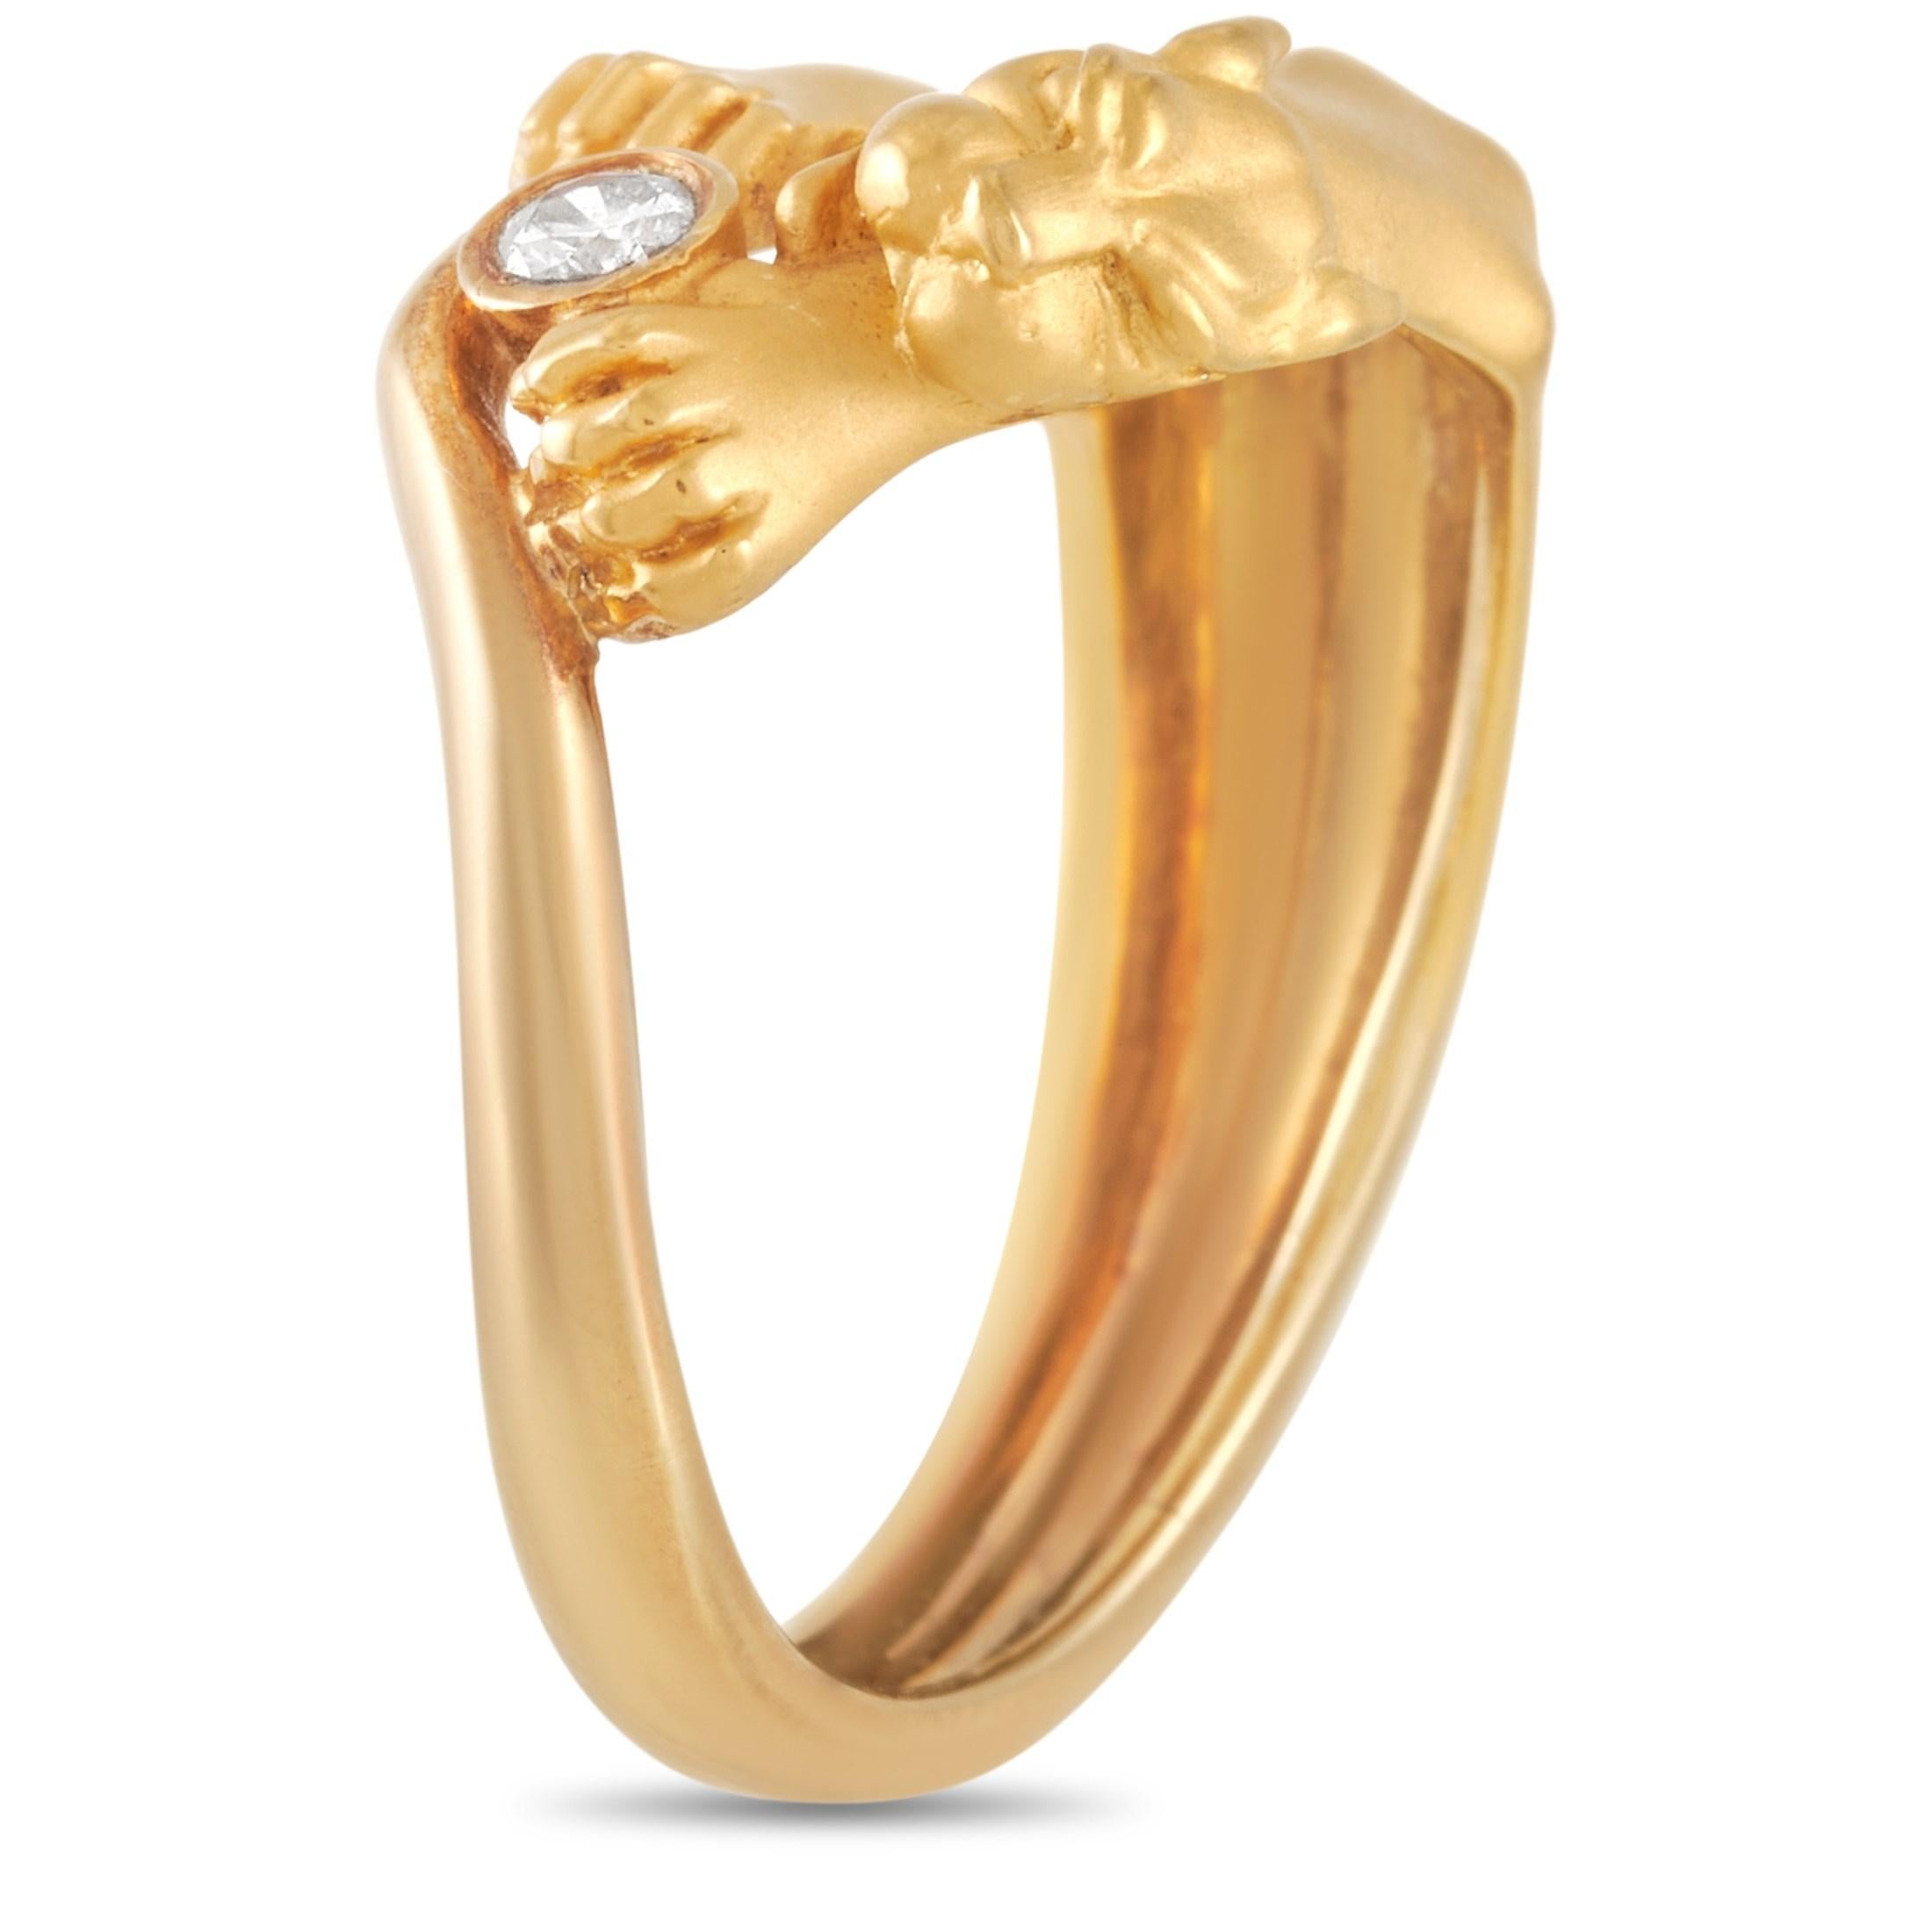 This Carrera Y Carrera Panther 18K Yellow Gold Diamond Ring is definitely unique. The ring is made with 18K yellow gold and features a yellow gold panther alongside a single round cut diamond. The ring has a band thickness of 5 mm, a top height of 3